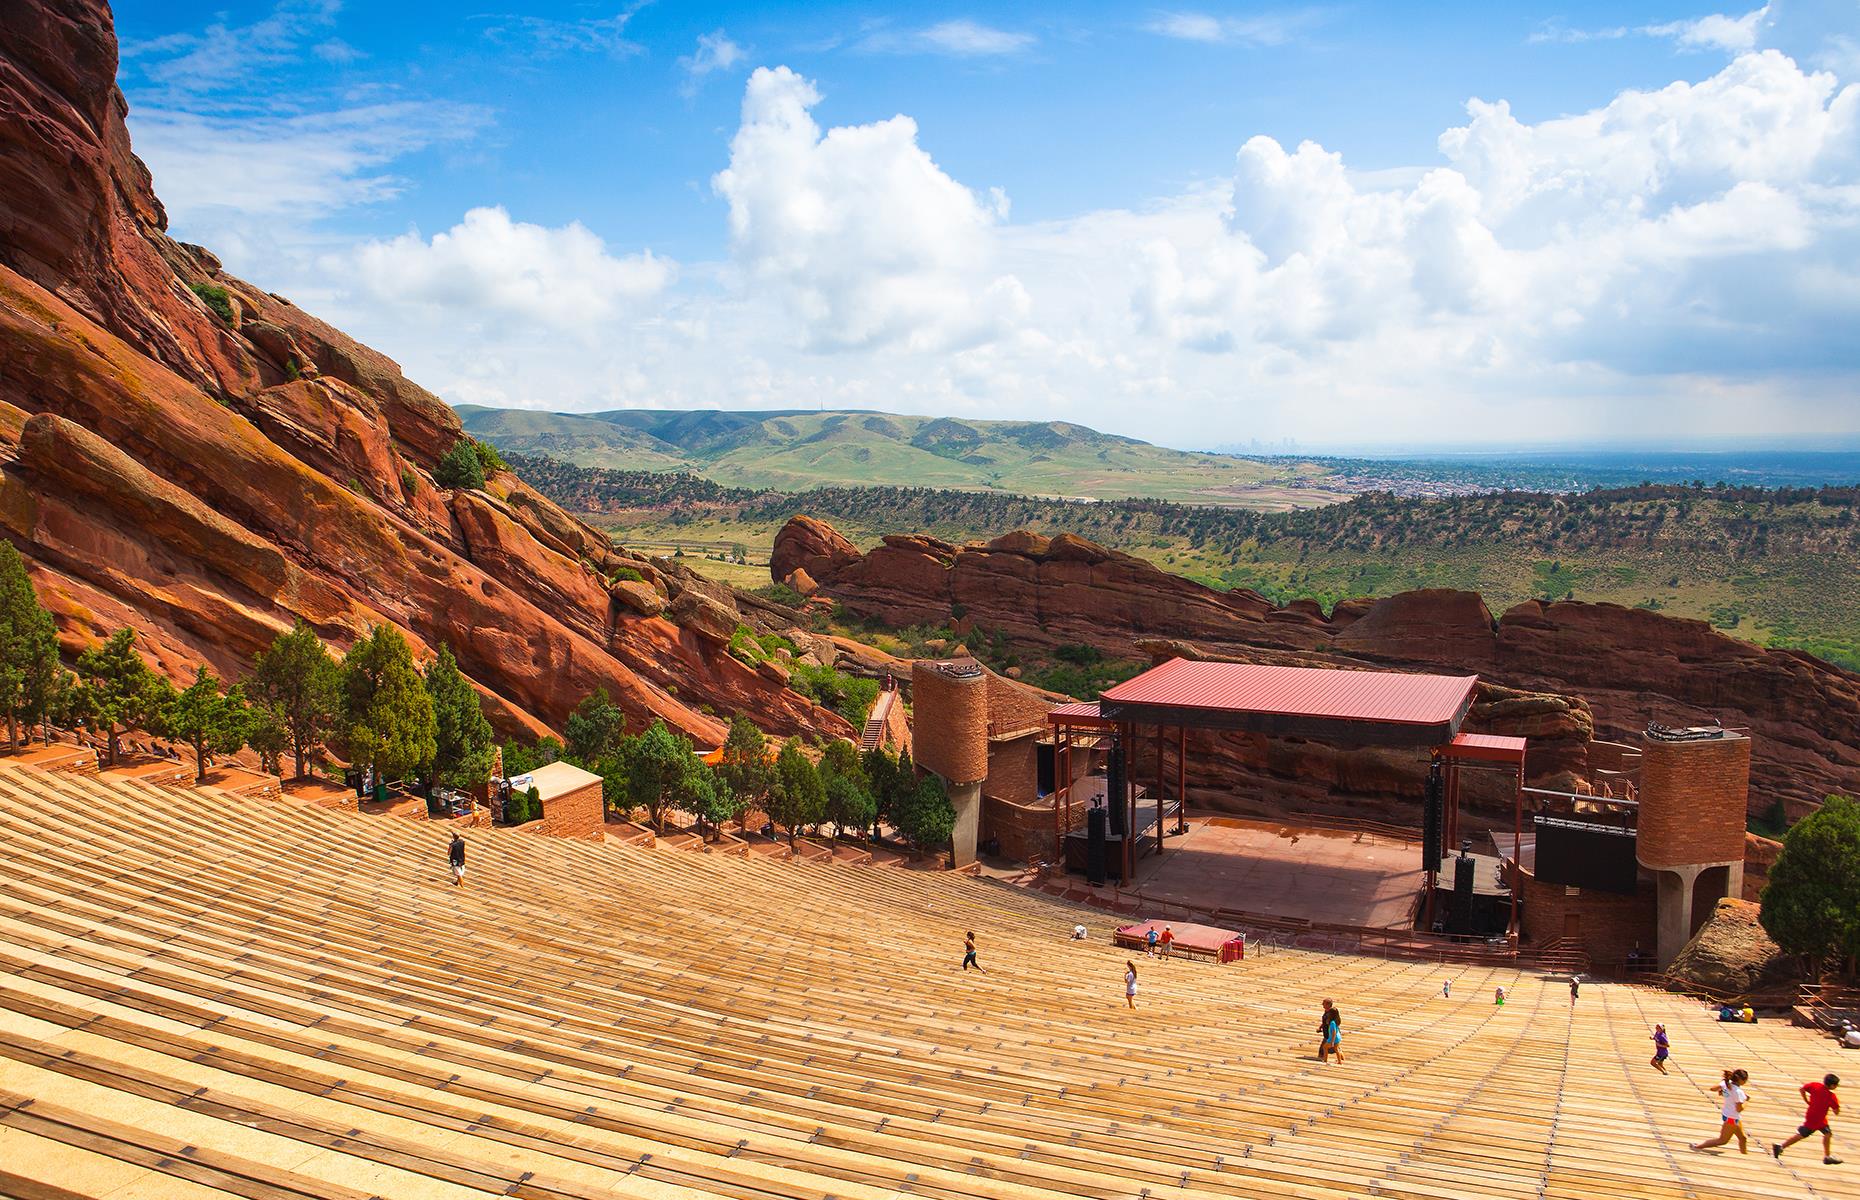 <p>Never mind who you see, they’re going to sound fantastic at Red Rocks. With a backdrop of lofty red rock and sandstone formations, this is the world’s only naturally occurring, acoustically perfect amphitheater. No wonder it’s attracted the best acts in the music business, from The Beatles to Jimi Hendrix, plus countless memorable live recordings.</p>  <p><a href="https://www.loveexploring.com/galleries/136589/the-best-music-venue-in-your-state?page=1"><strong>This is the best music venue in your state</strong></a></p>